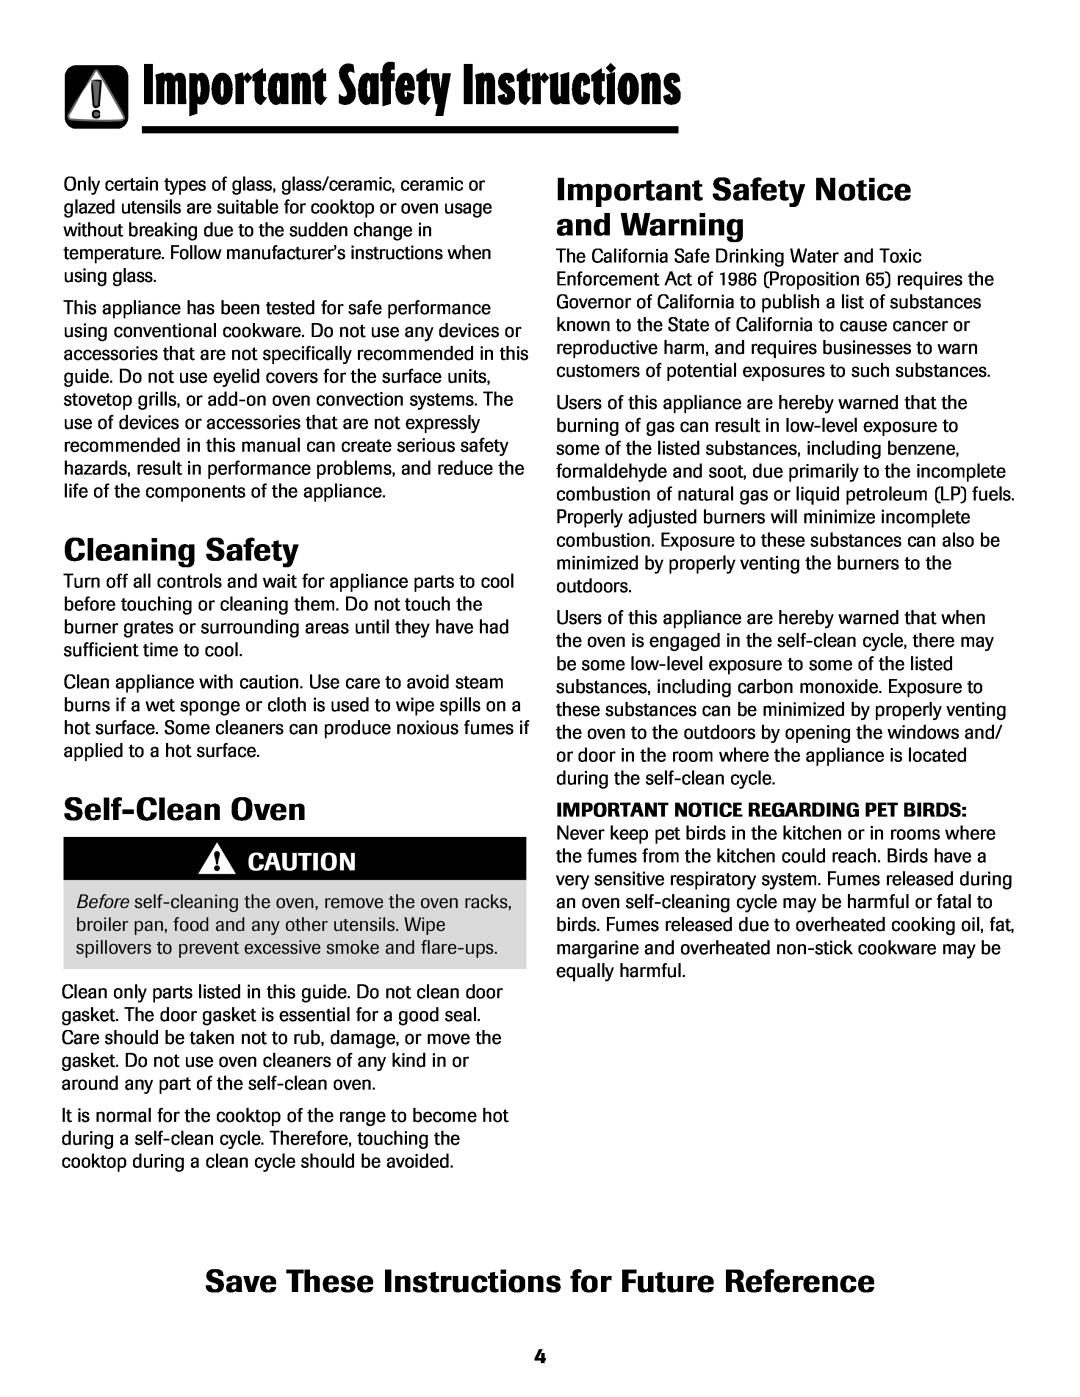 Maytag MGS5875BDW Cleaning Safety, Self-Clean Oven, Important Safety Notice and Warning, Important Safety Instructions 